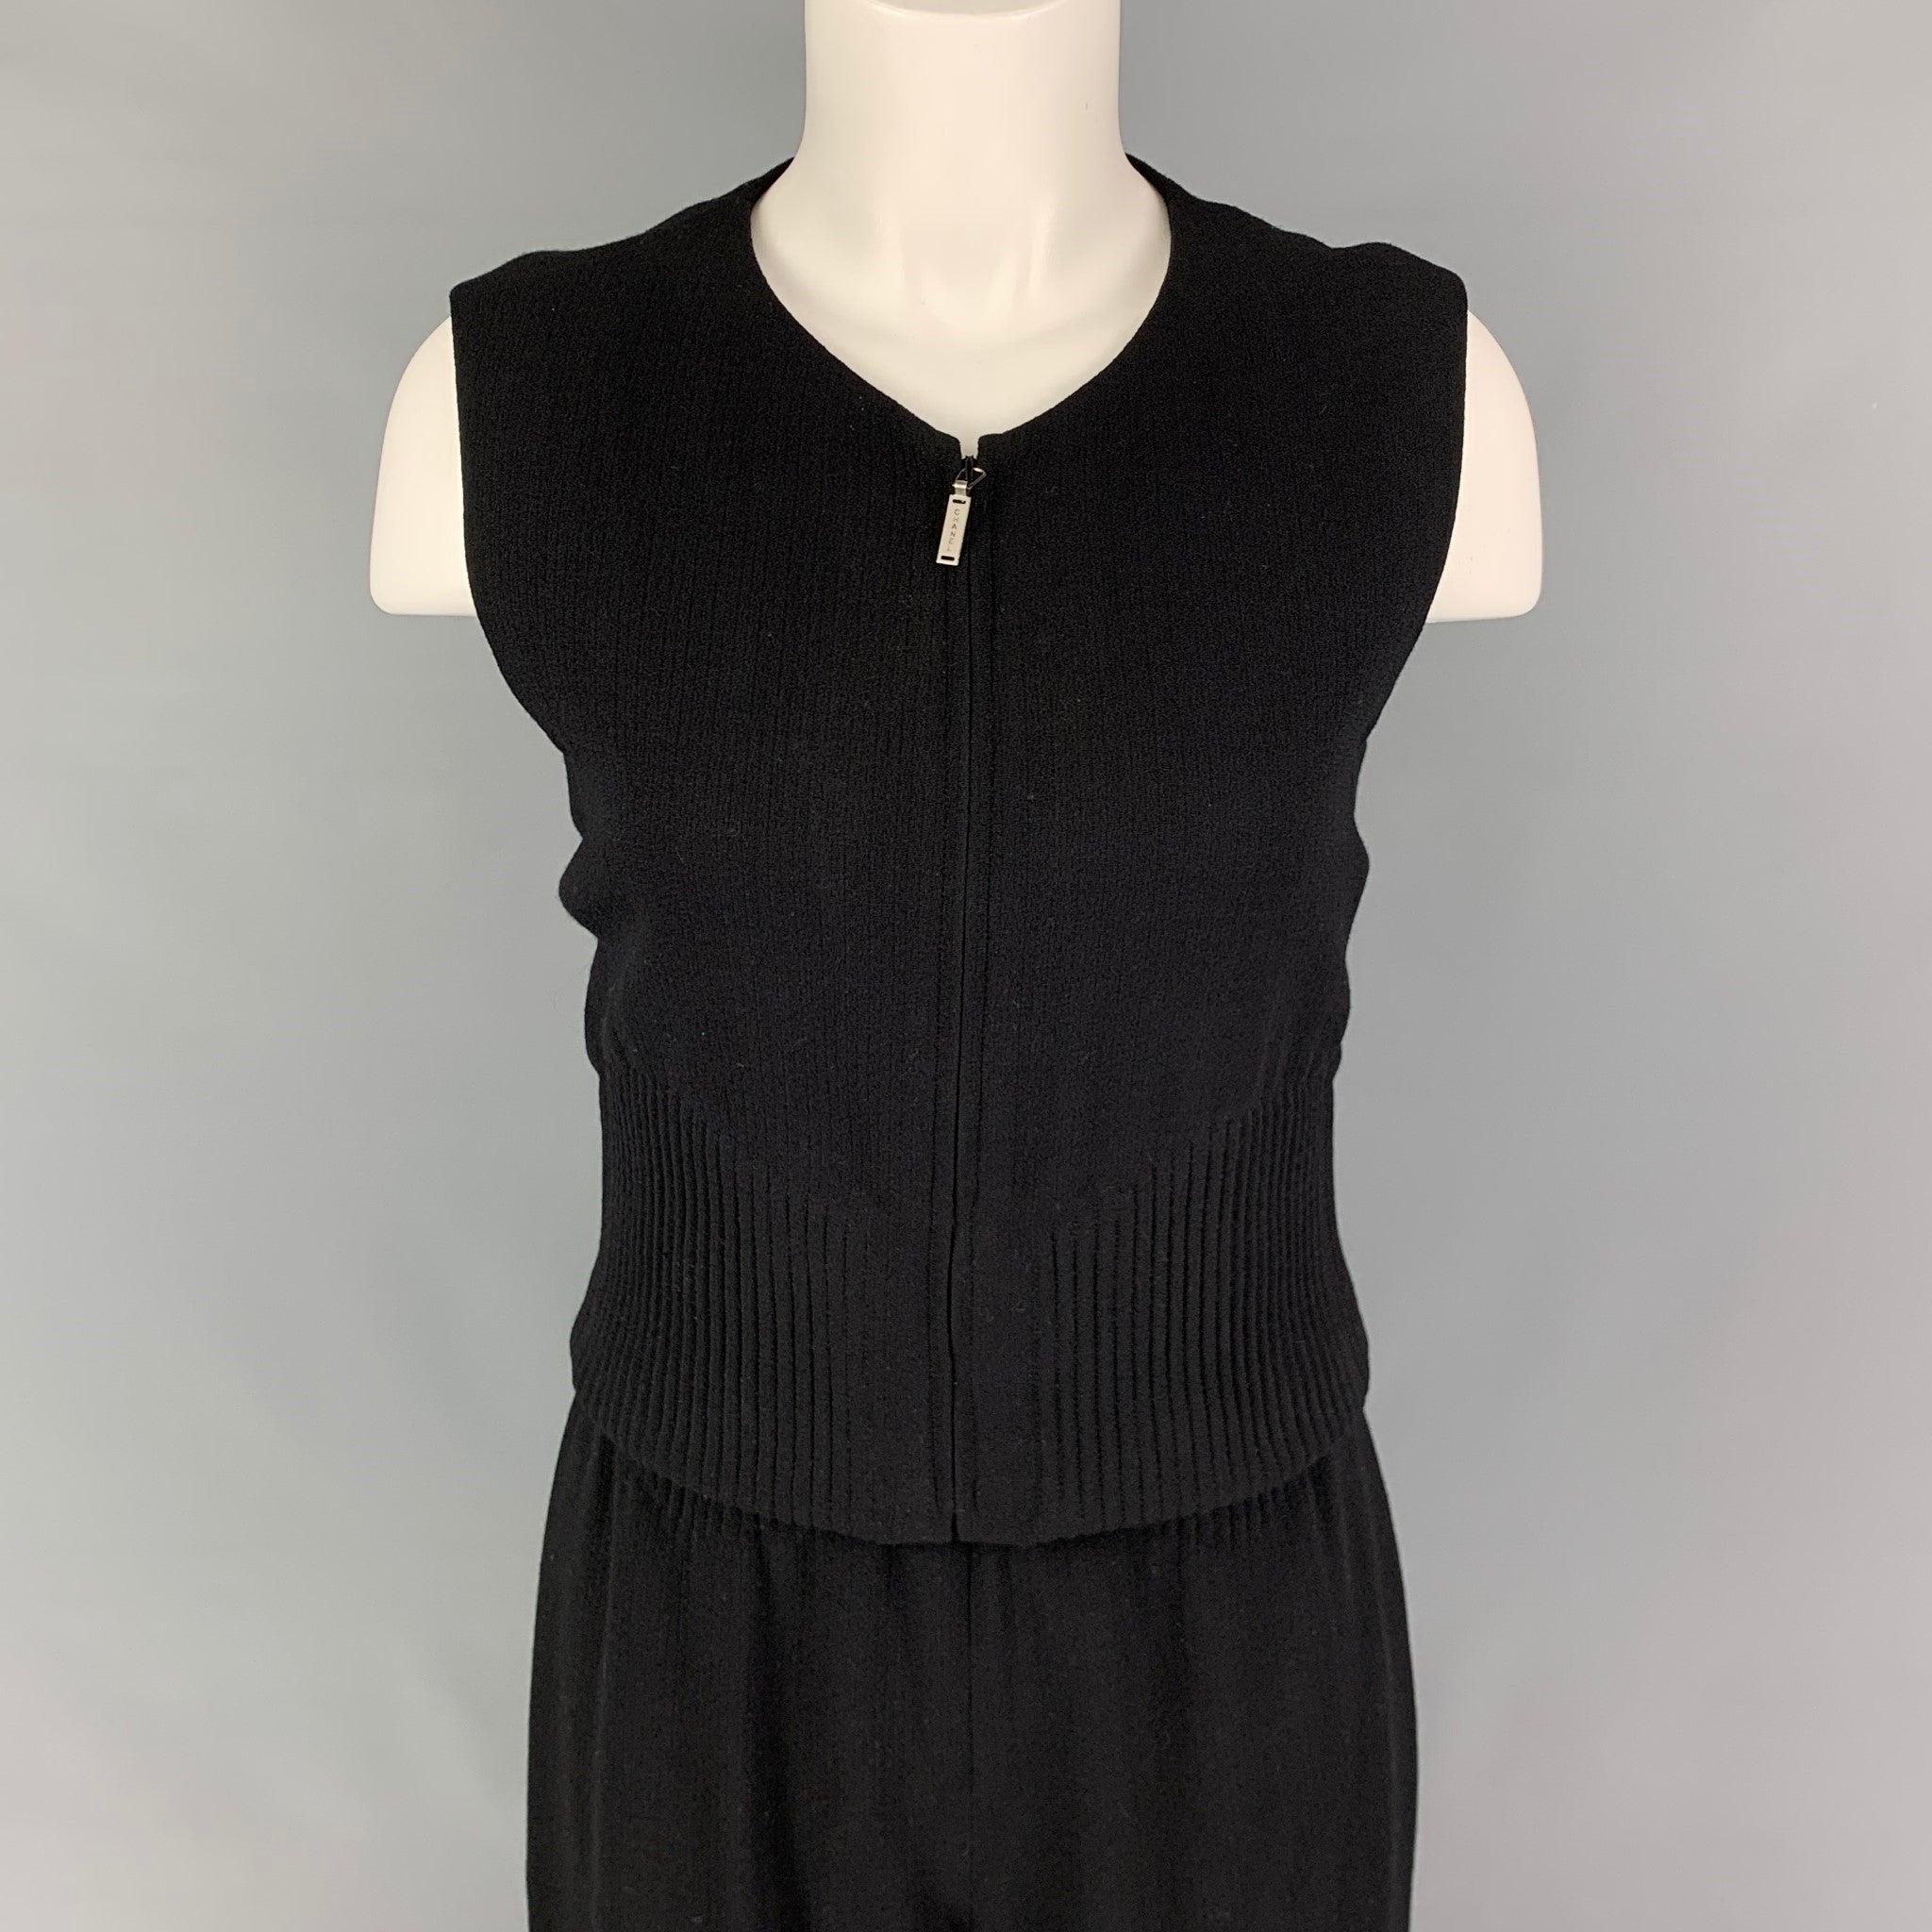 CHANEL 2 Piece set comes in a black ribbed wool featuring sleeveless, front zipper closure top, logo button detail, and matching wide leg pants.
Very Good
Pre-Owned Condition. 

Marked:   99S 94305 / 40 

Measurements: 
  -TopShoulder: 14.75 inches 